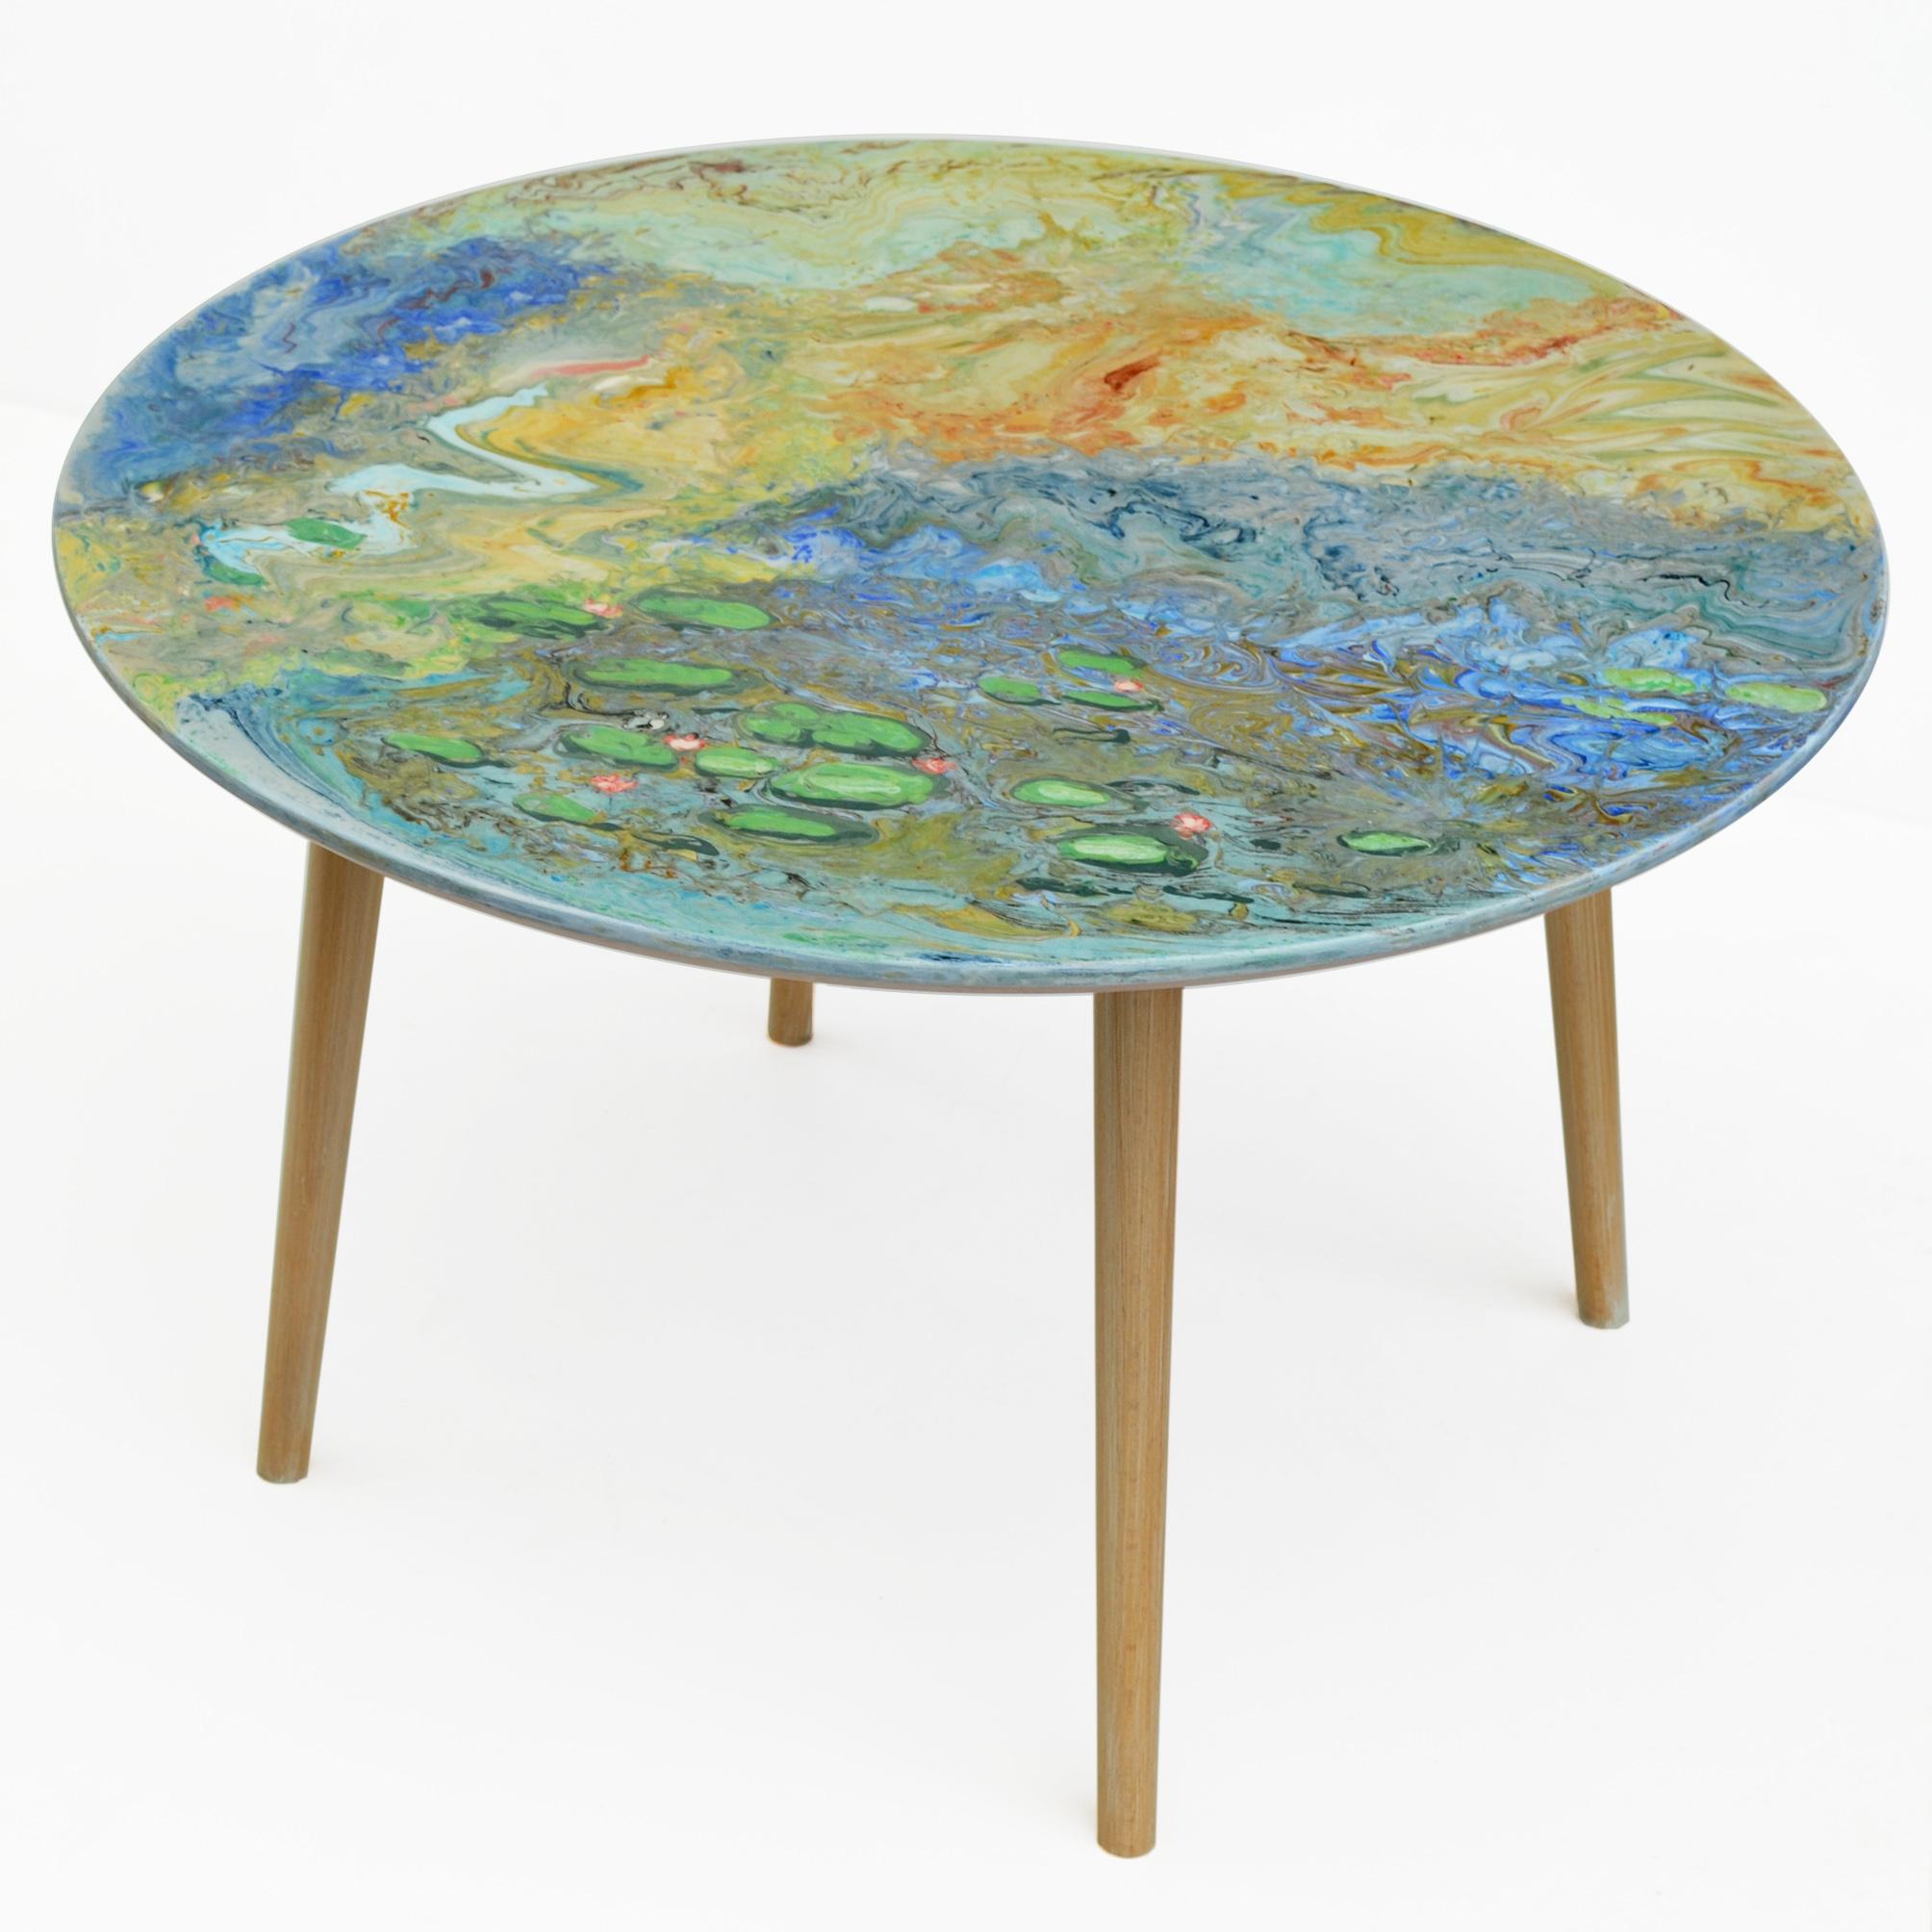 This small table made with marble top decorated entirely with scagliola art inlaies, whose decoration is a tribute to the French artist Monet and resumes its famous water lilies in a rather abstract vision. The base is made of natural wood with 4